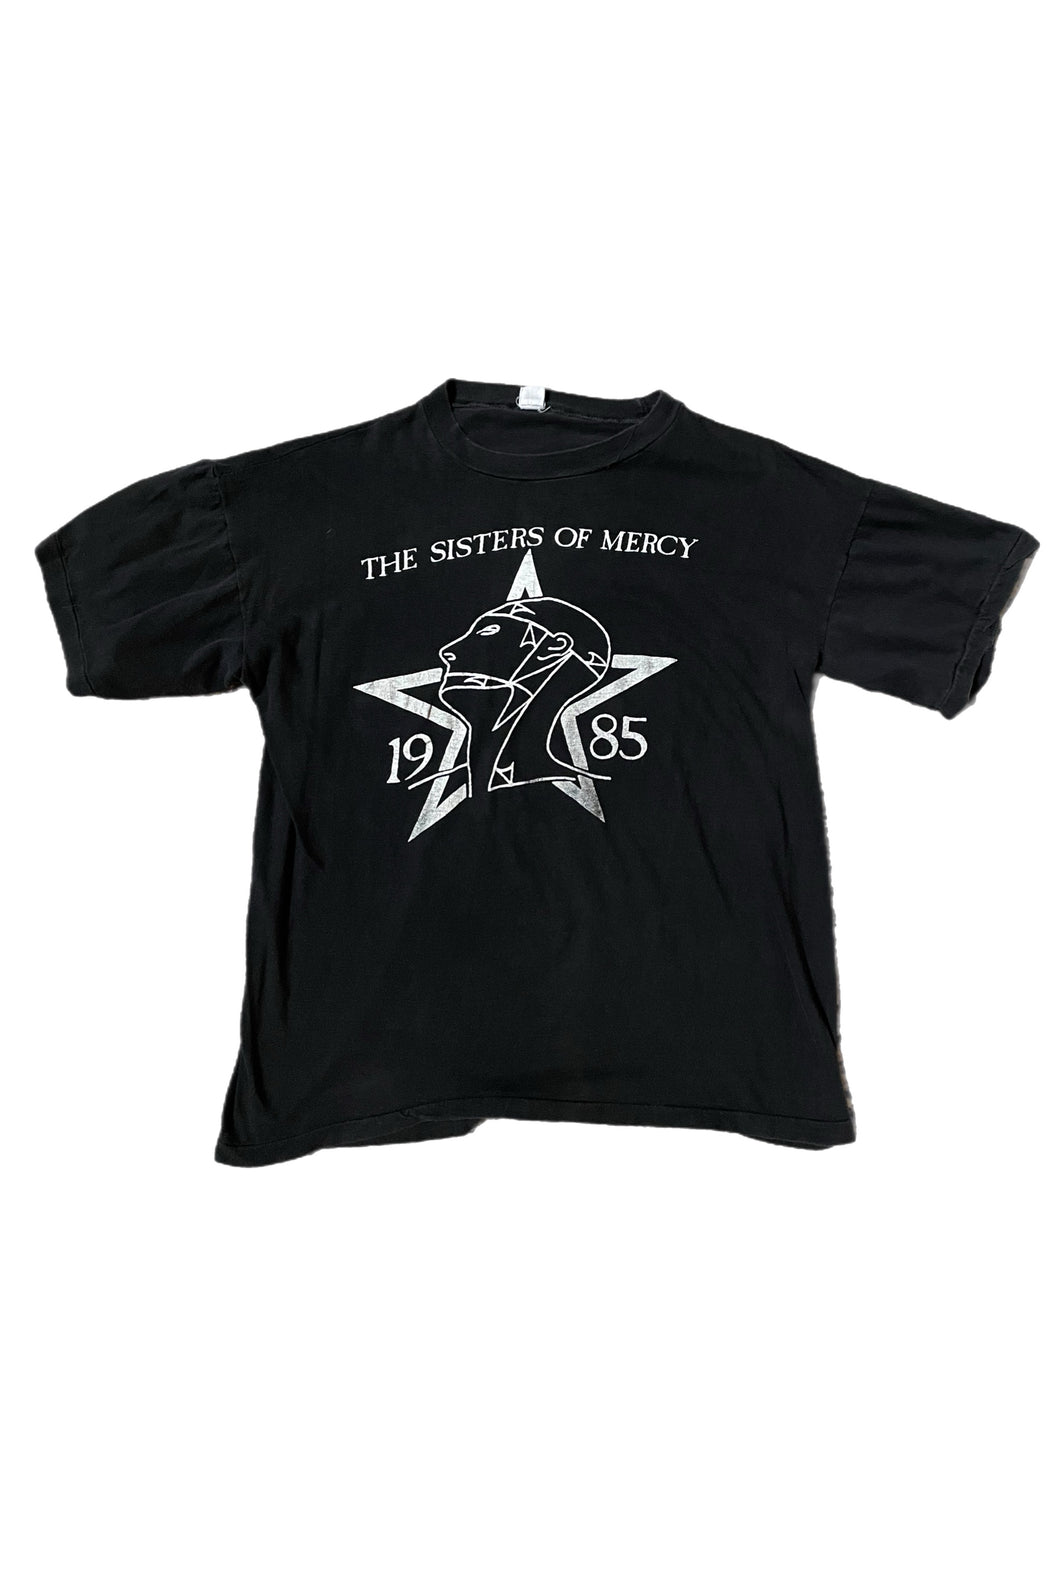 Vintage 1985 Sisters of Mercy Tour T-Shirt